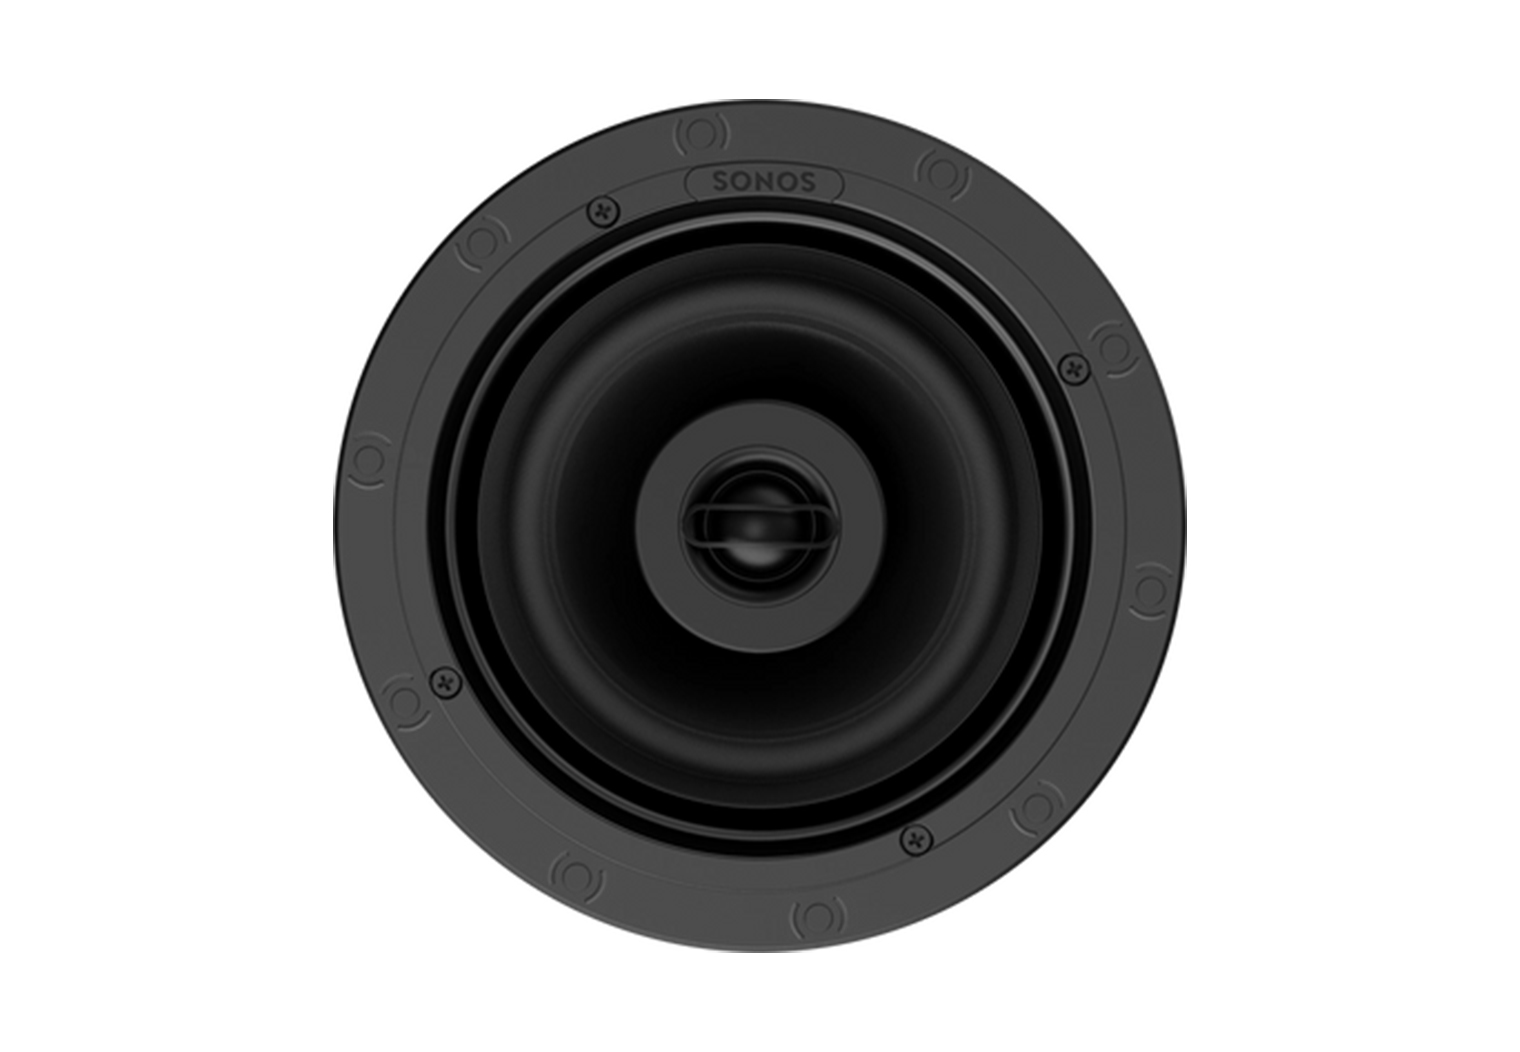 Sonos In-Ceiling Speakers front no grille